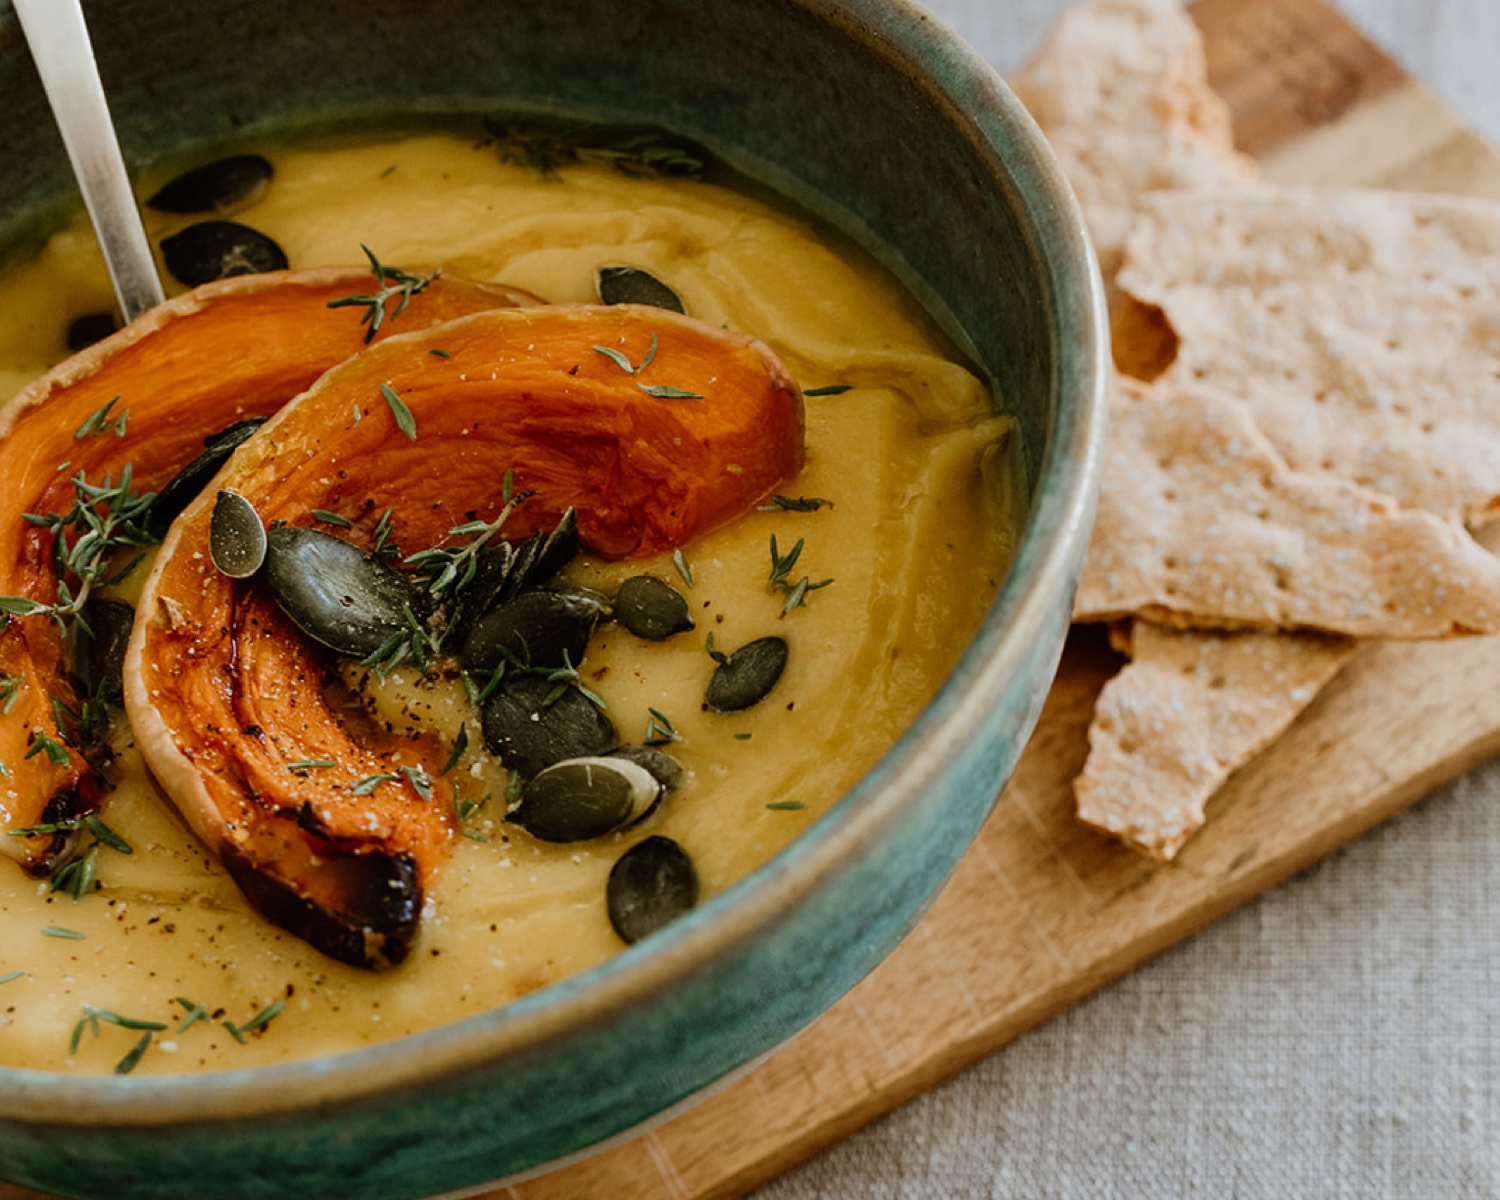 A ceramic bowl filled with delicious autumn pumpkin soup made from a favourite recipe